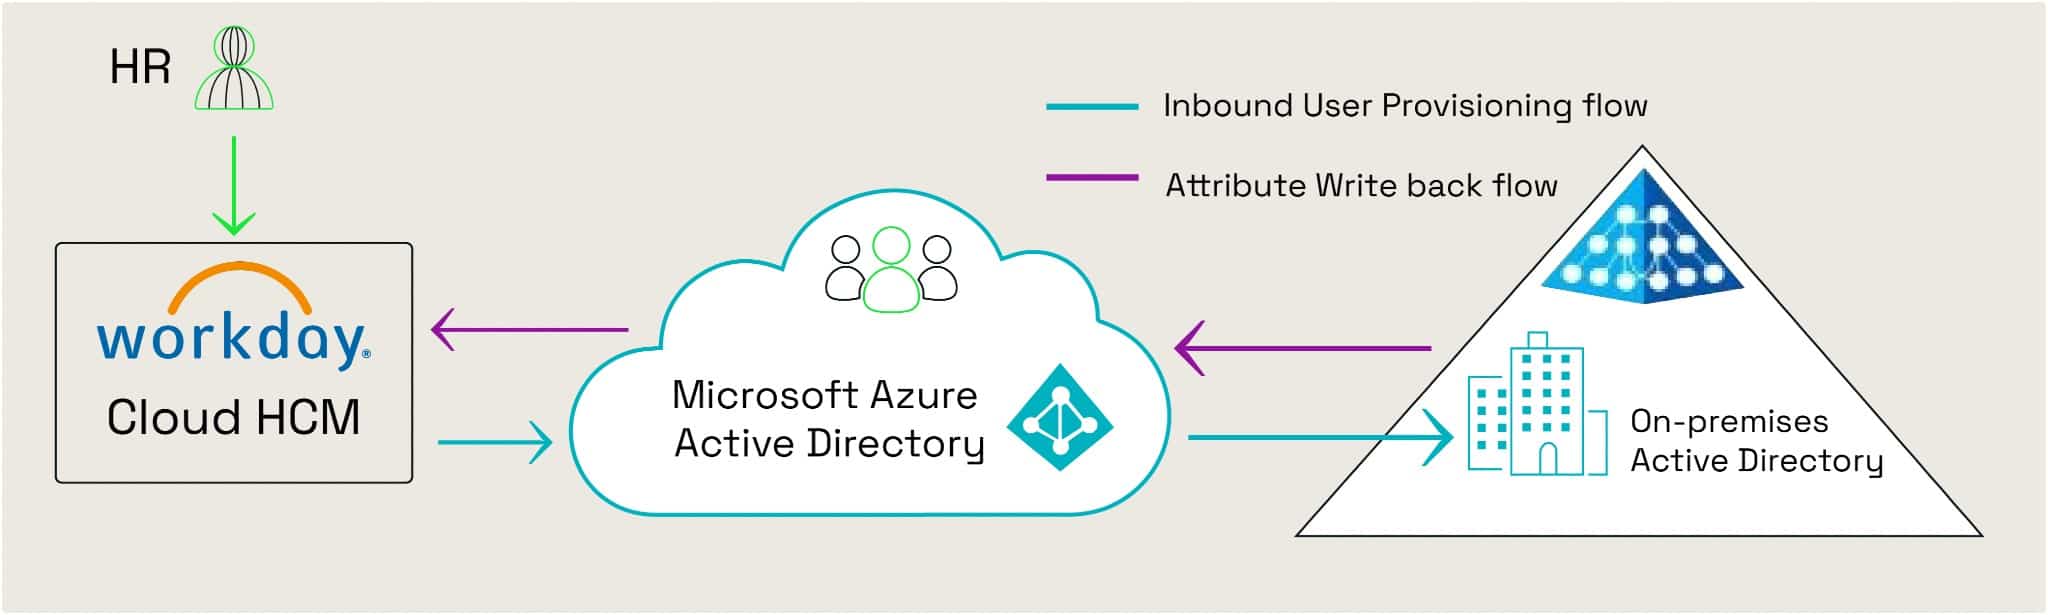 HCM Workday to Azure AD to on-premises flowchart